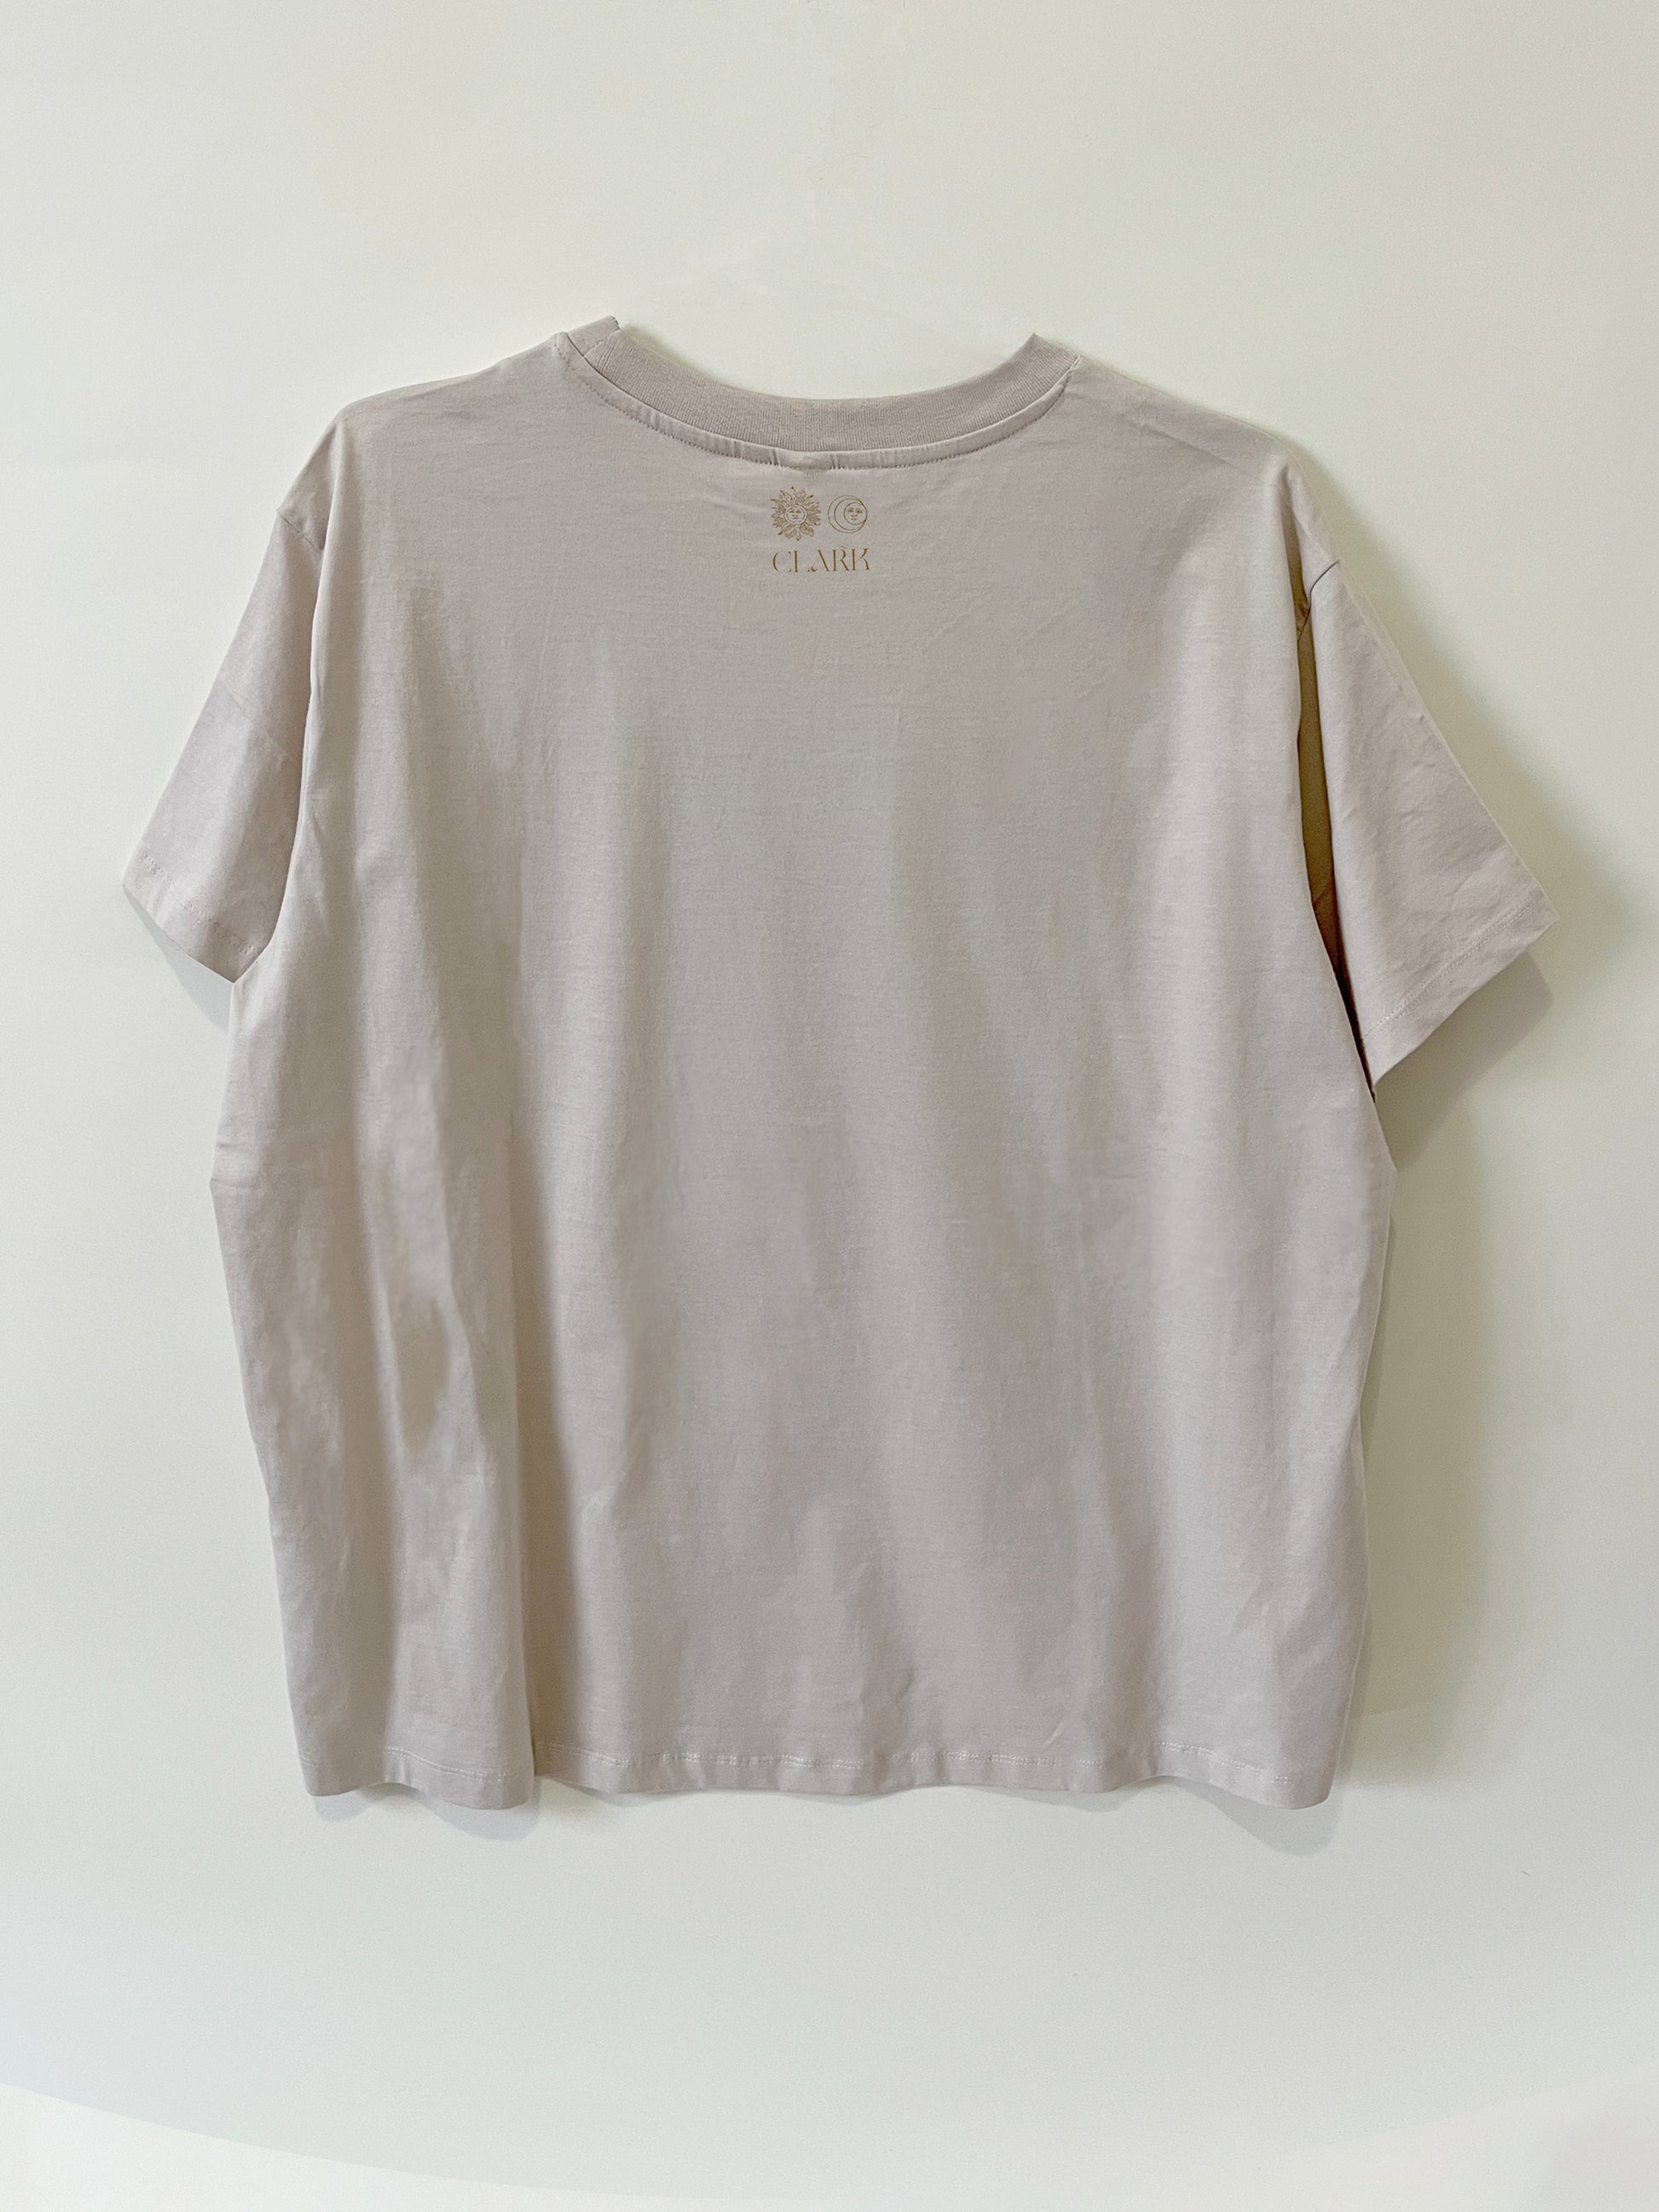 Product photo of Happy As A Clam tee by CLARK. The Back view of straight-cut gray tee with CLARK logo printed in gold at neck. Logo is of Sun and Moon with CLARK underneath. 